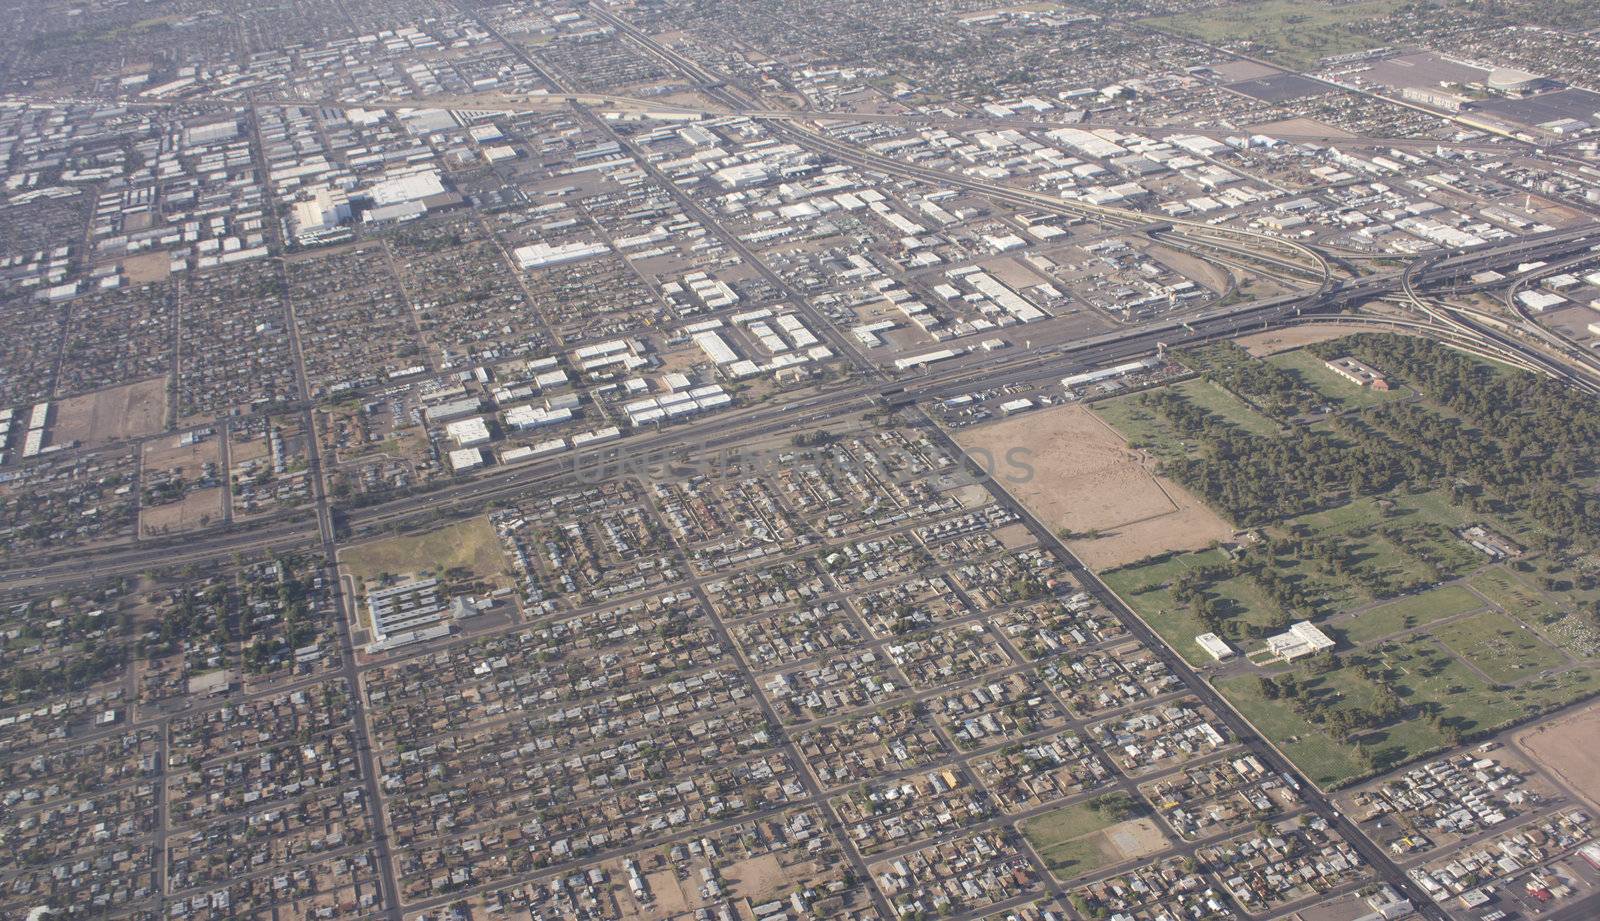 Aerial of the grid in a dense urban setting